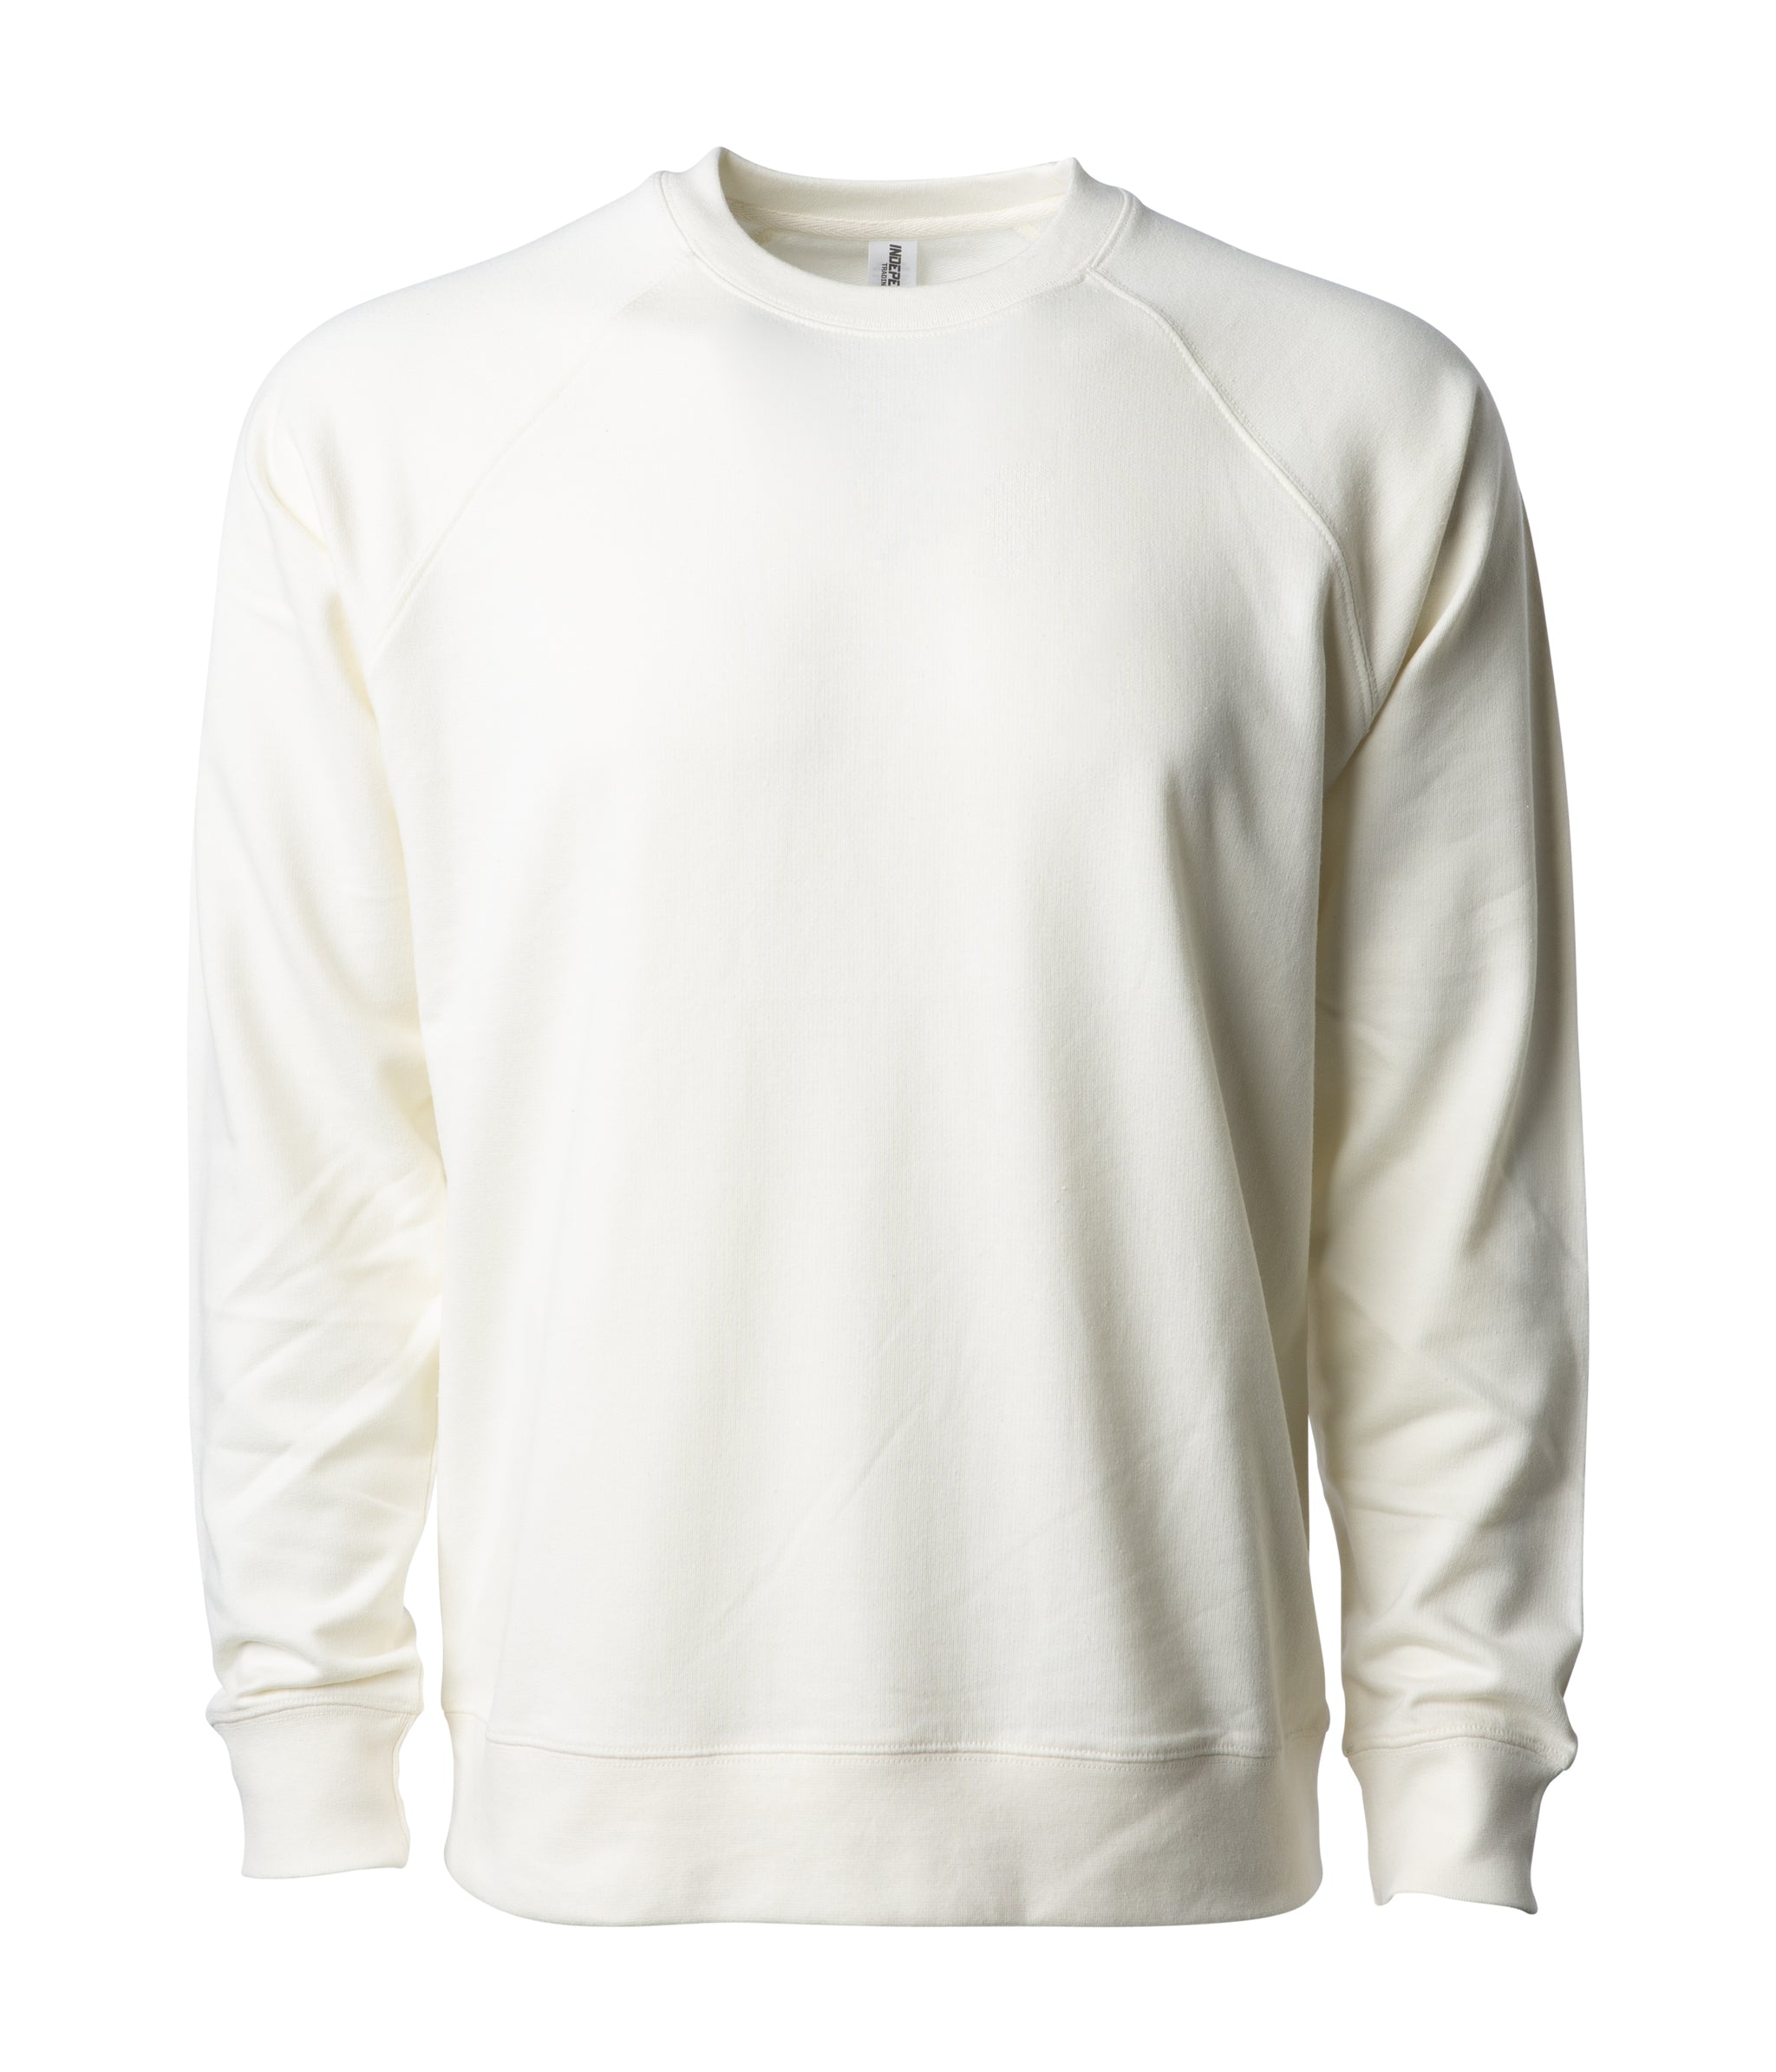 Unisex Lightweight Loopback Terry Crew | Independent Trading Company